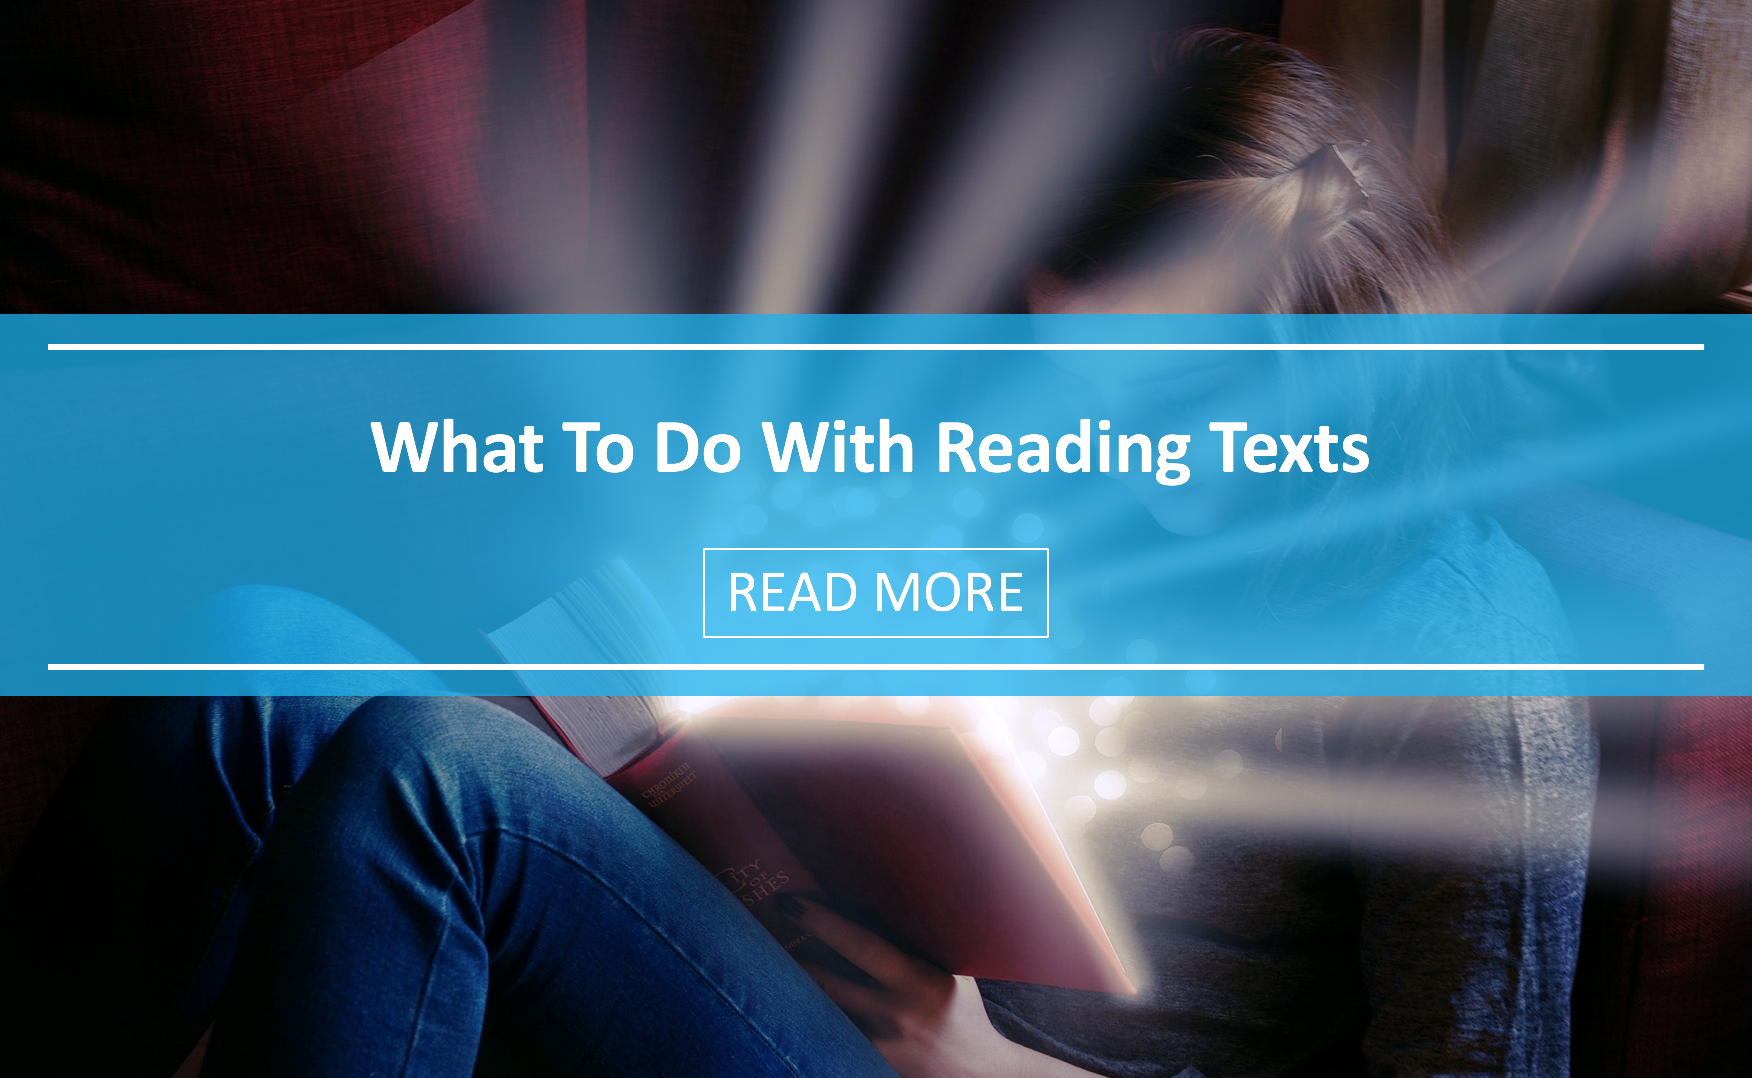 What To Do With Reading Texts: 10 Creative Ways